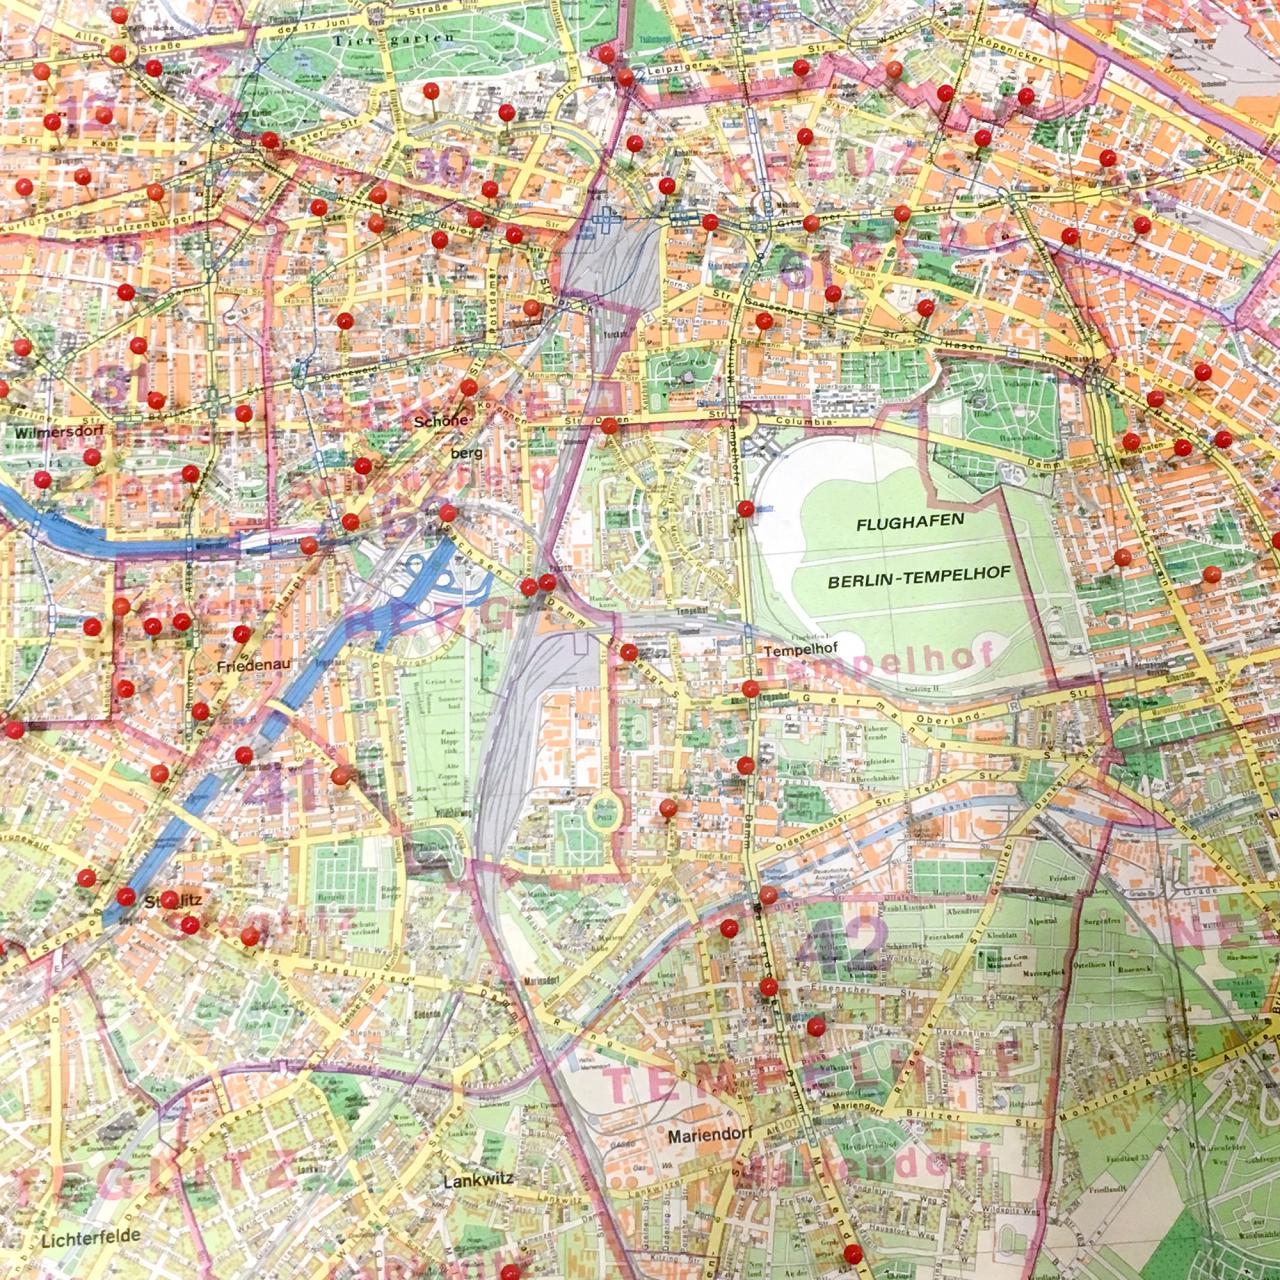 Map of Berlin with red pins